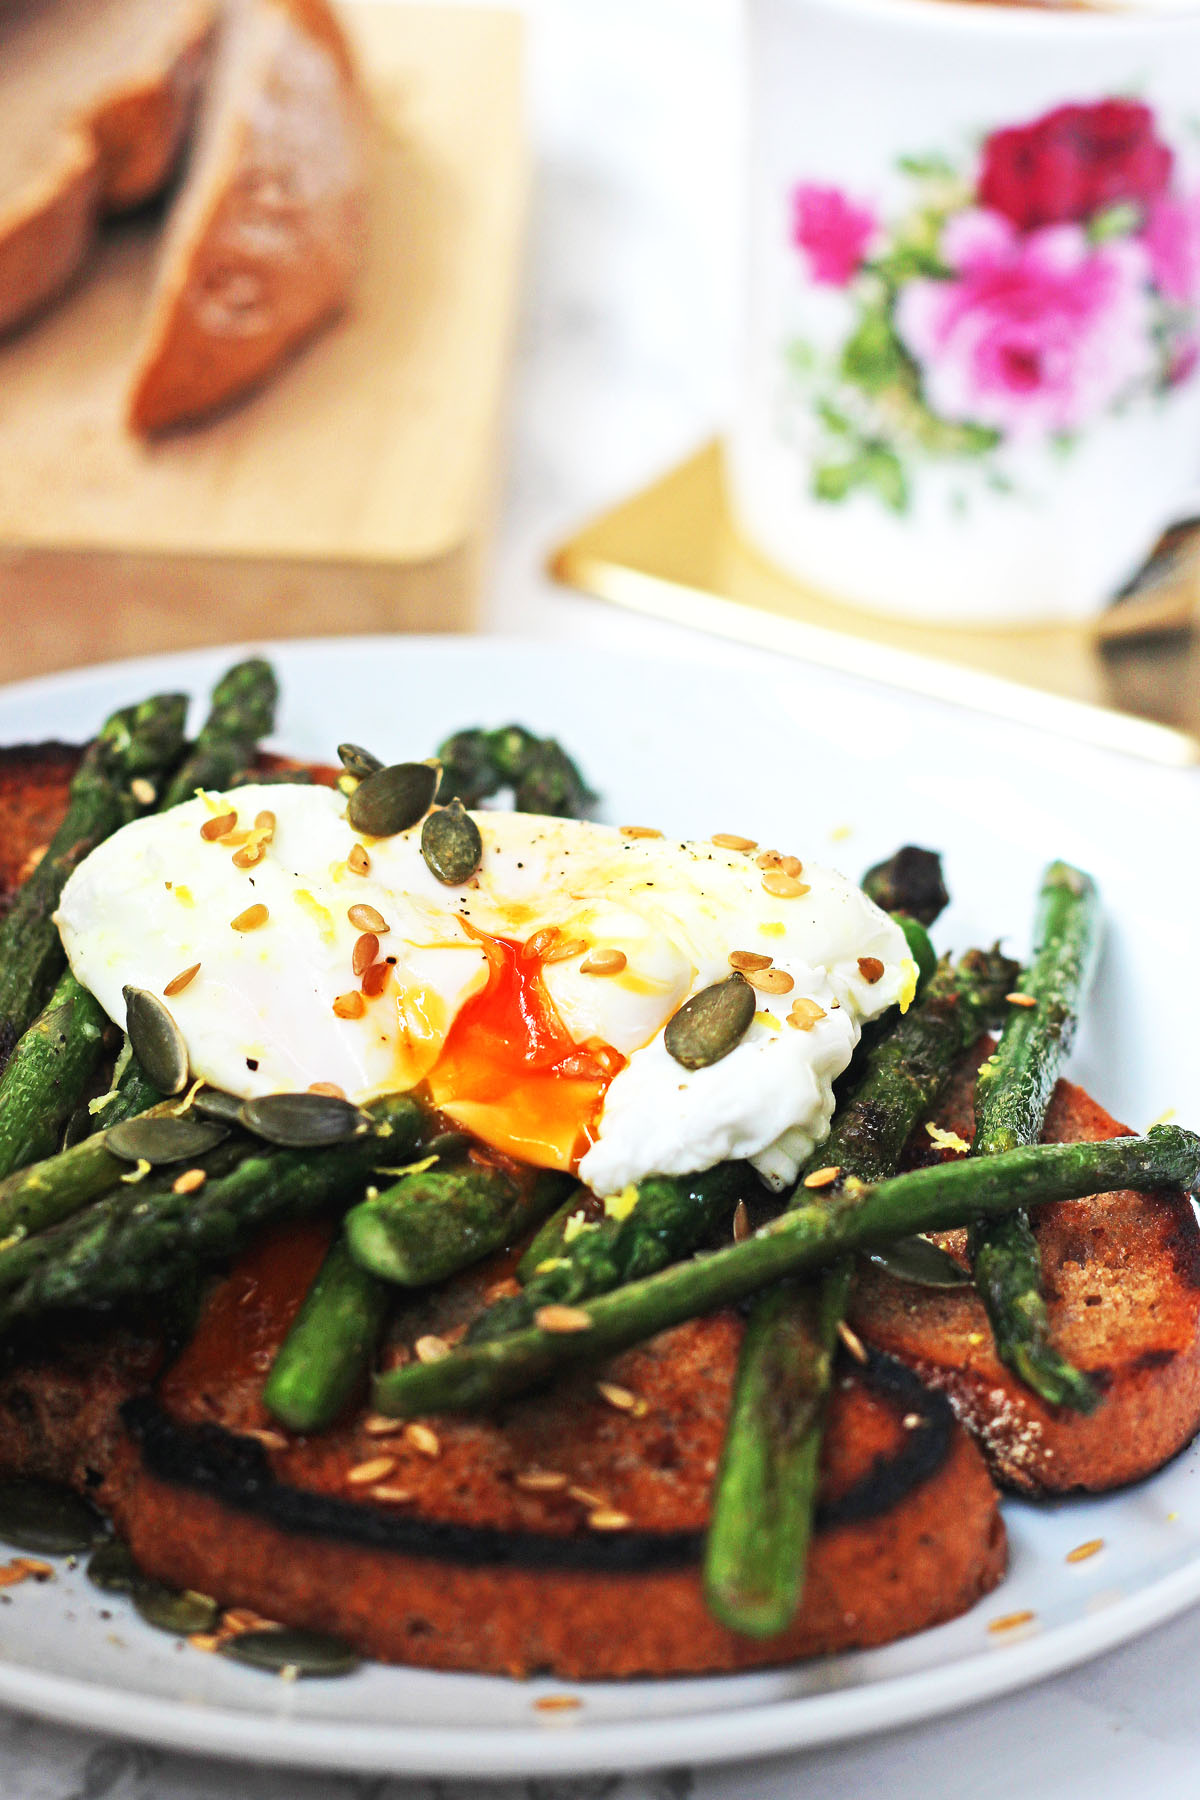 Brighten up breakfast with griddled asparagus and poached egg on toast golden linseed and pumpkin seeds